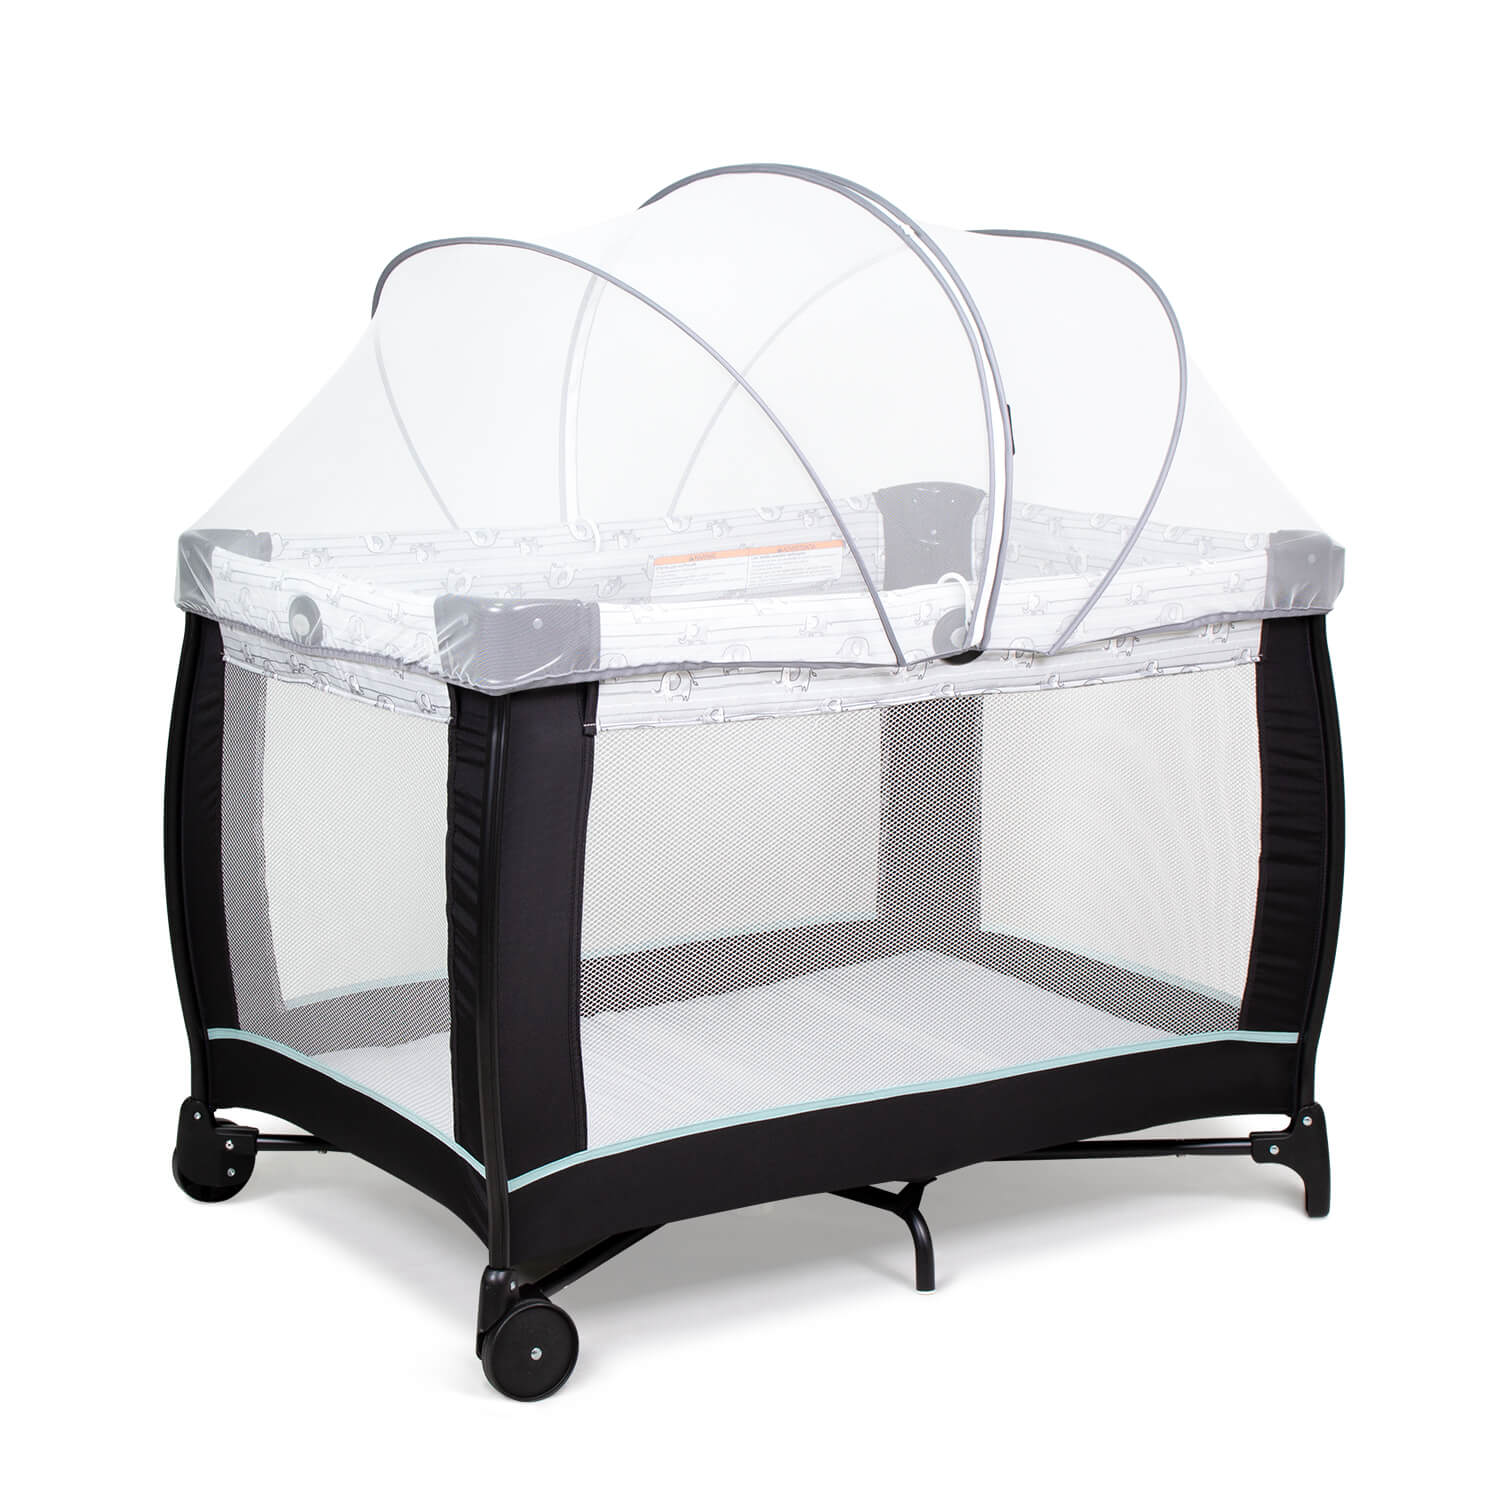 Pack and Play Playard Mosquito Net